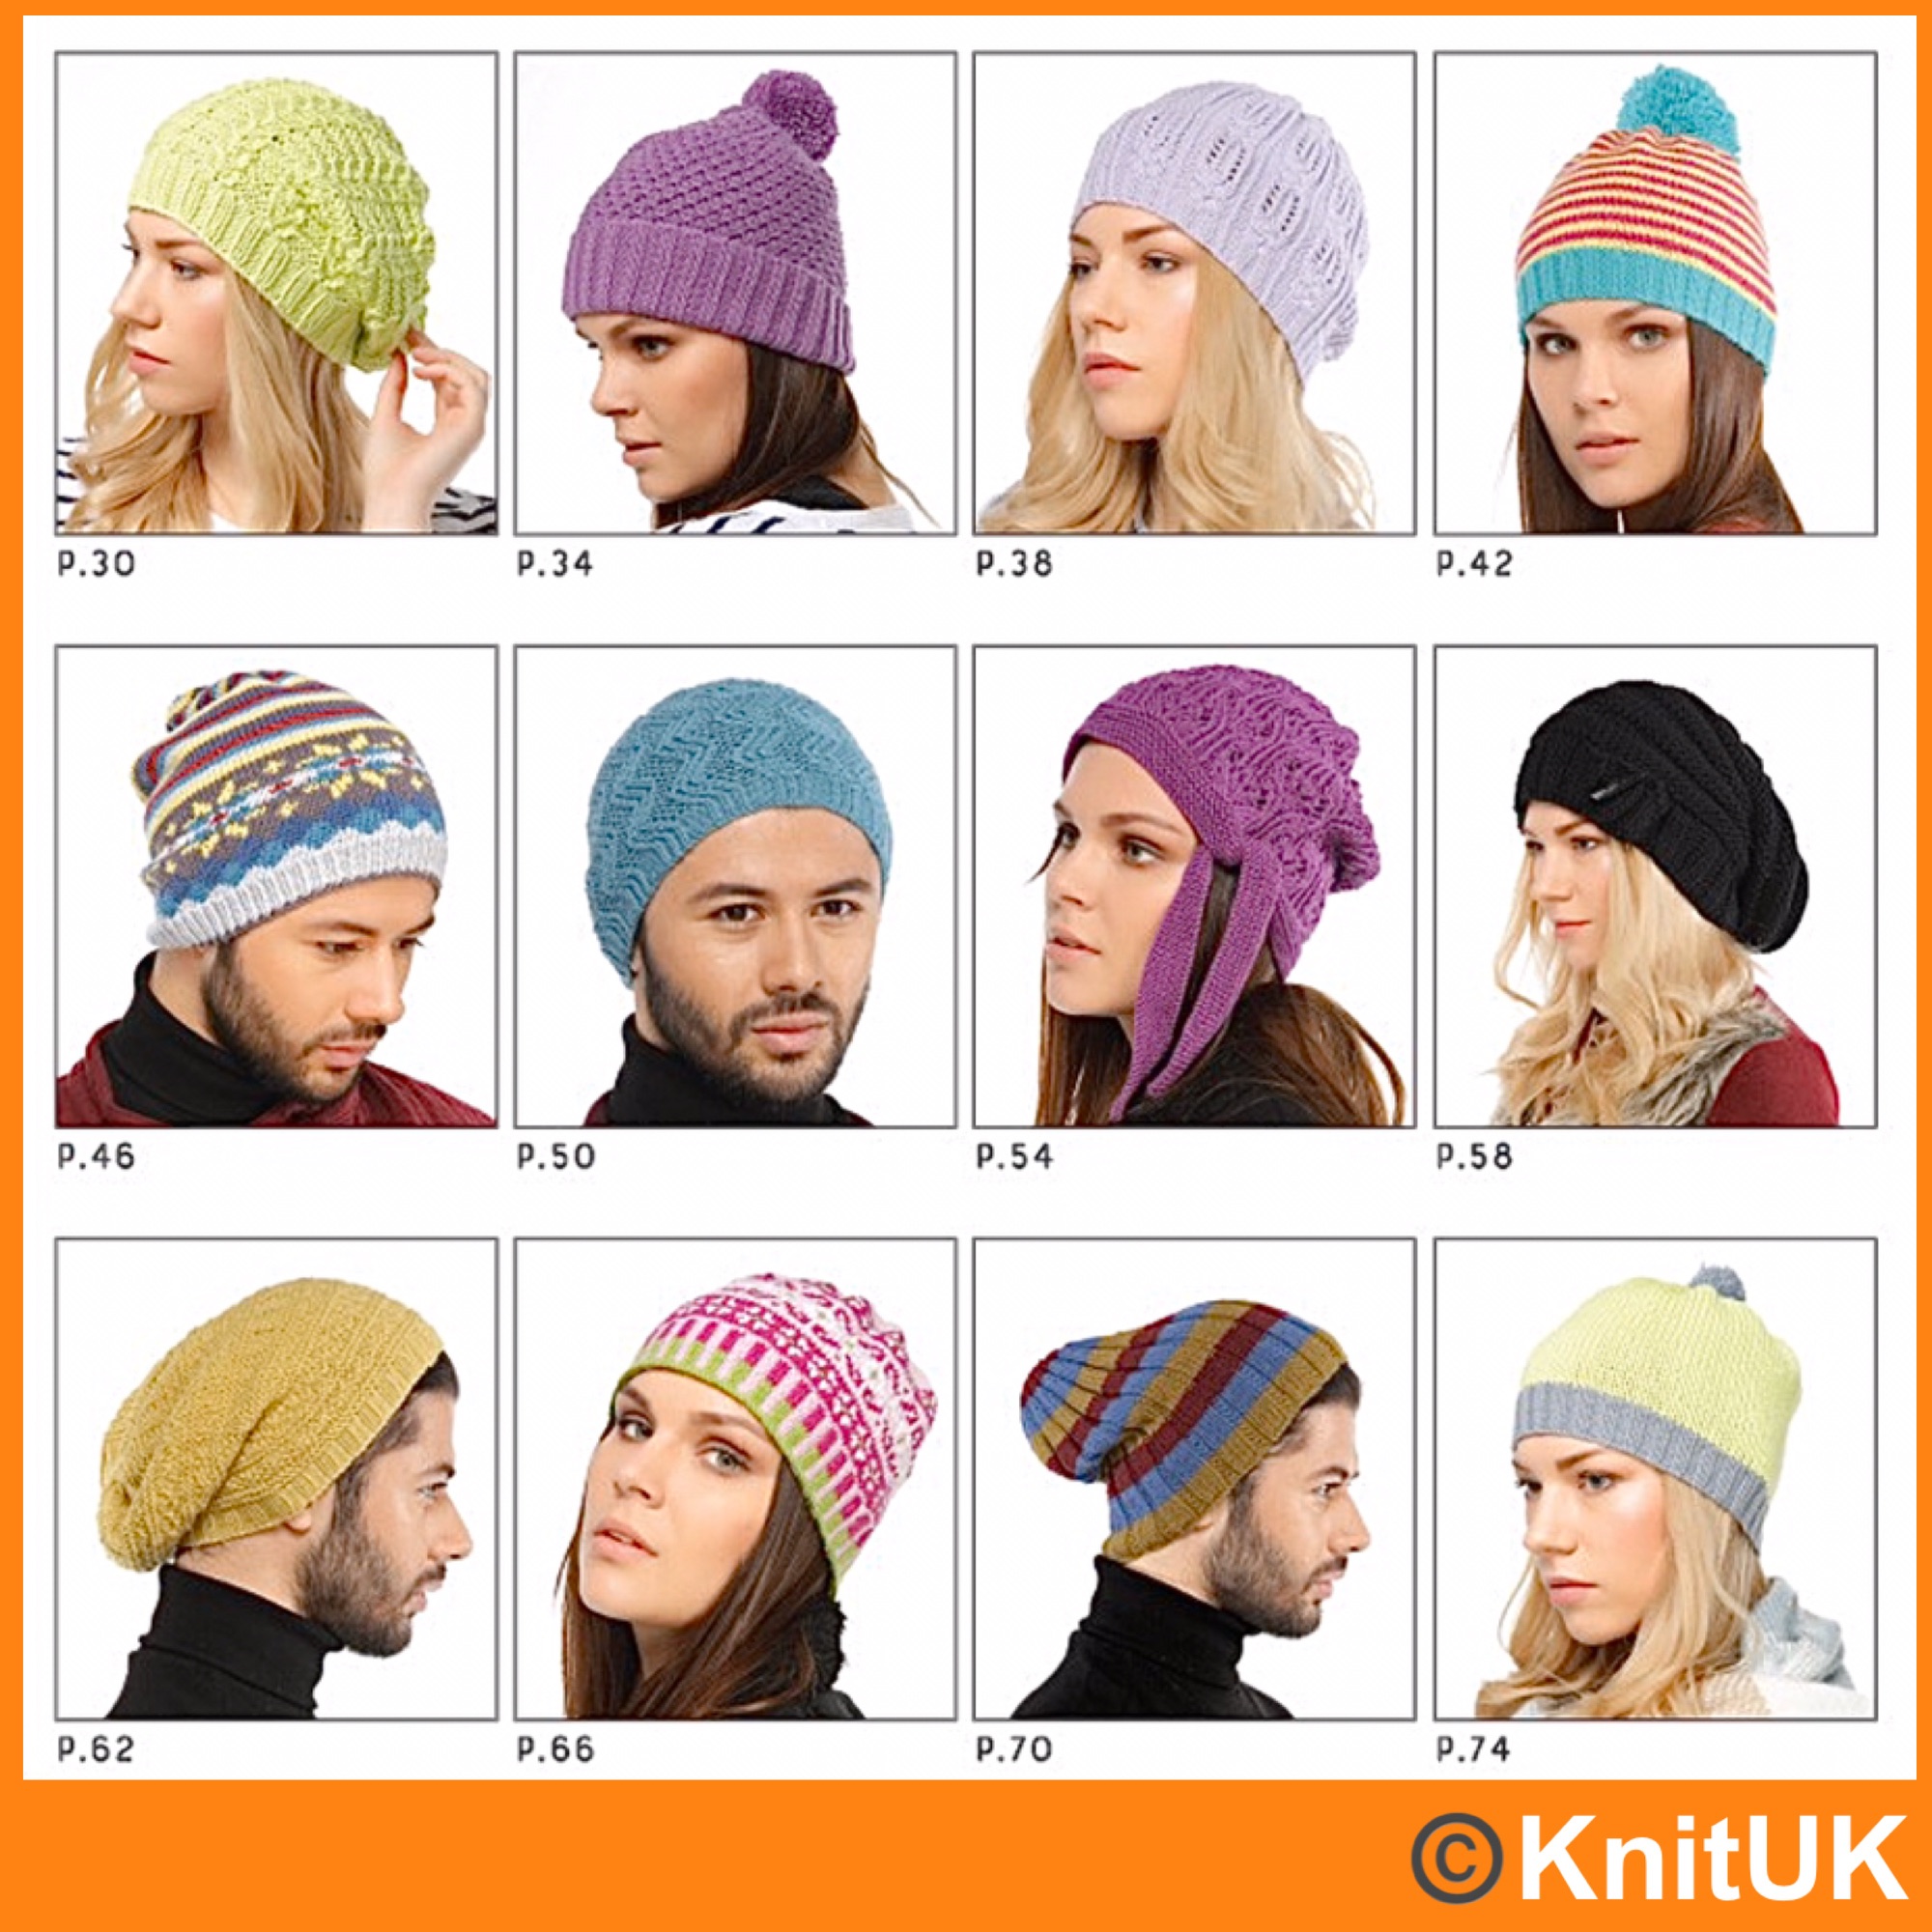 Knitted Hats Book with 24 designs by Jody Long. Tuva Publishing | KnitUK